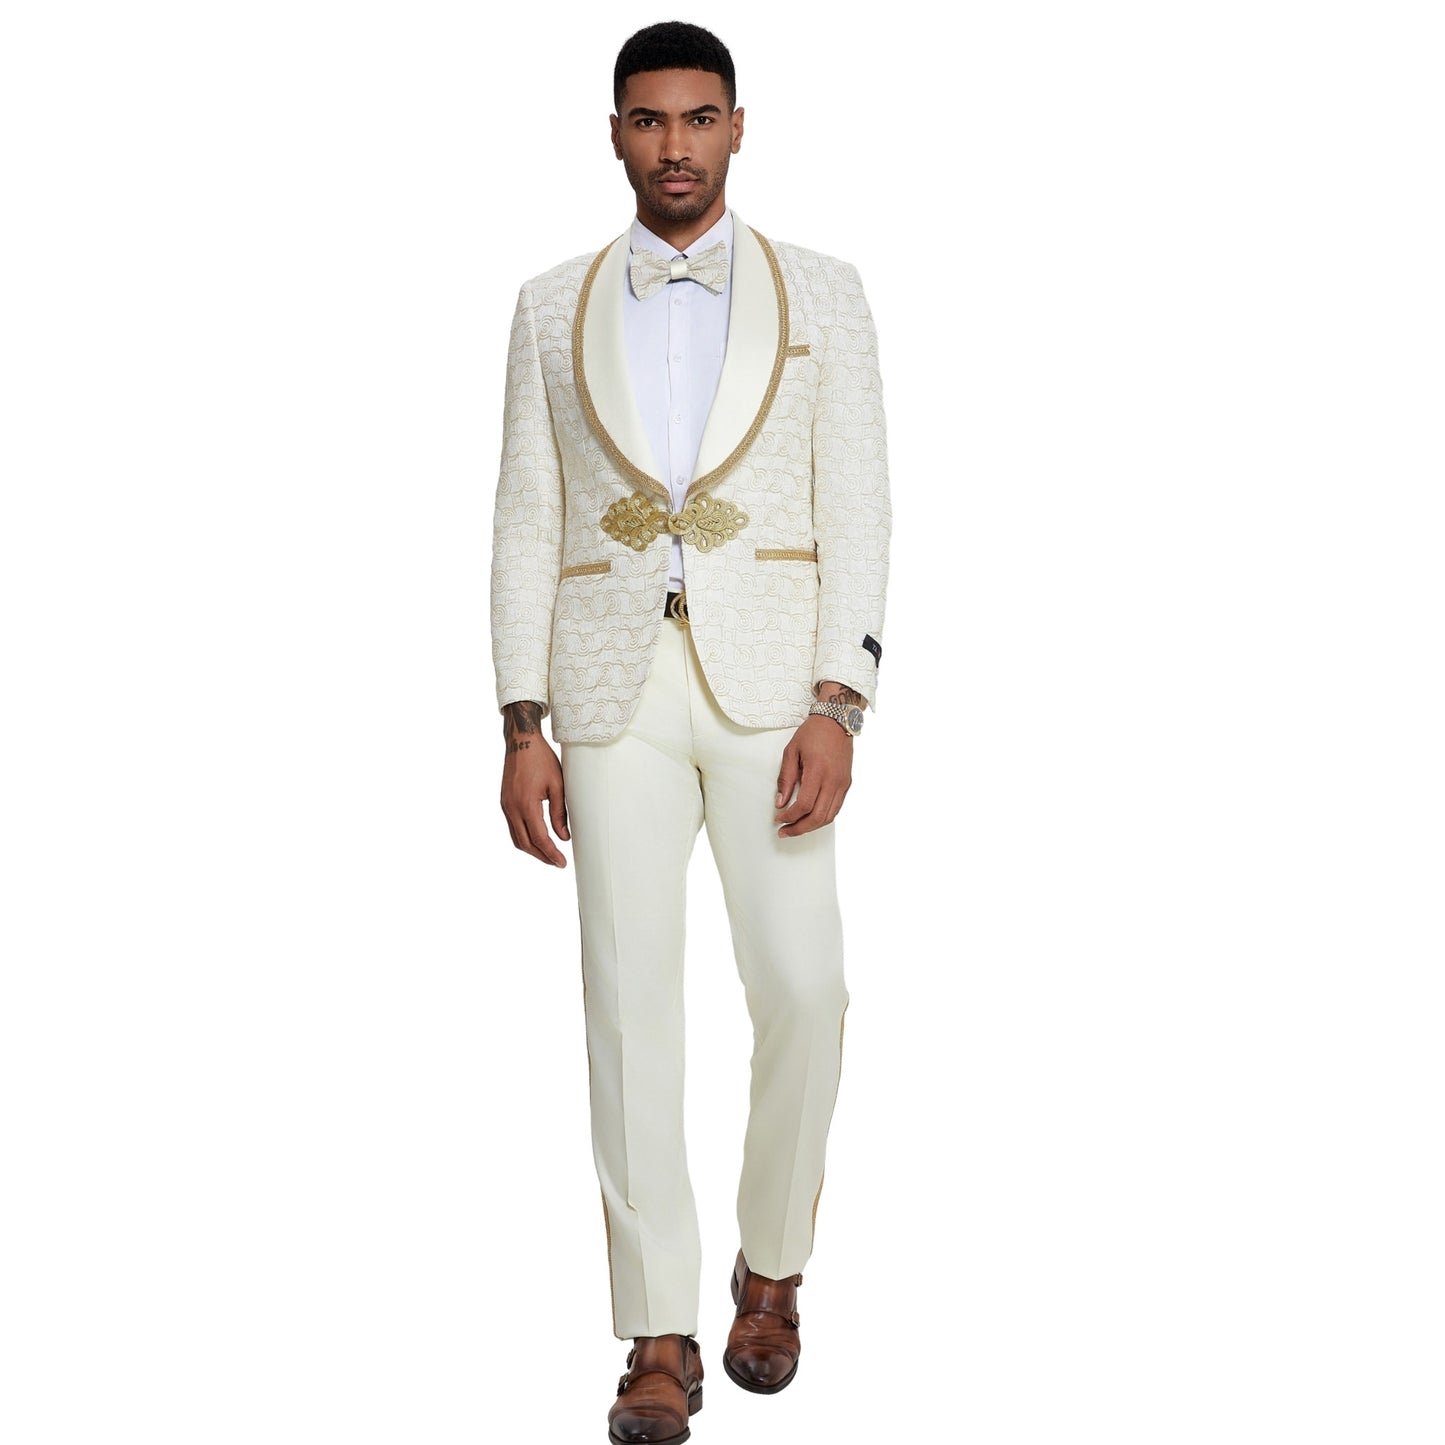 Ivory and Gold Circle Tuxedo Full View, Satin Ivory Pants, Ivory Satin Lapels with Gold Trim, Elegant Gold Buttons, Slim Fit Men's Suit, Matching Ivory and Gold Circle Bowtie.